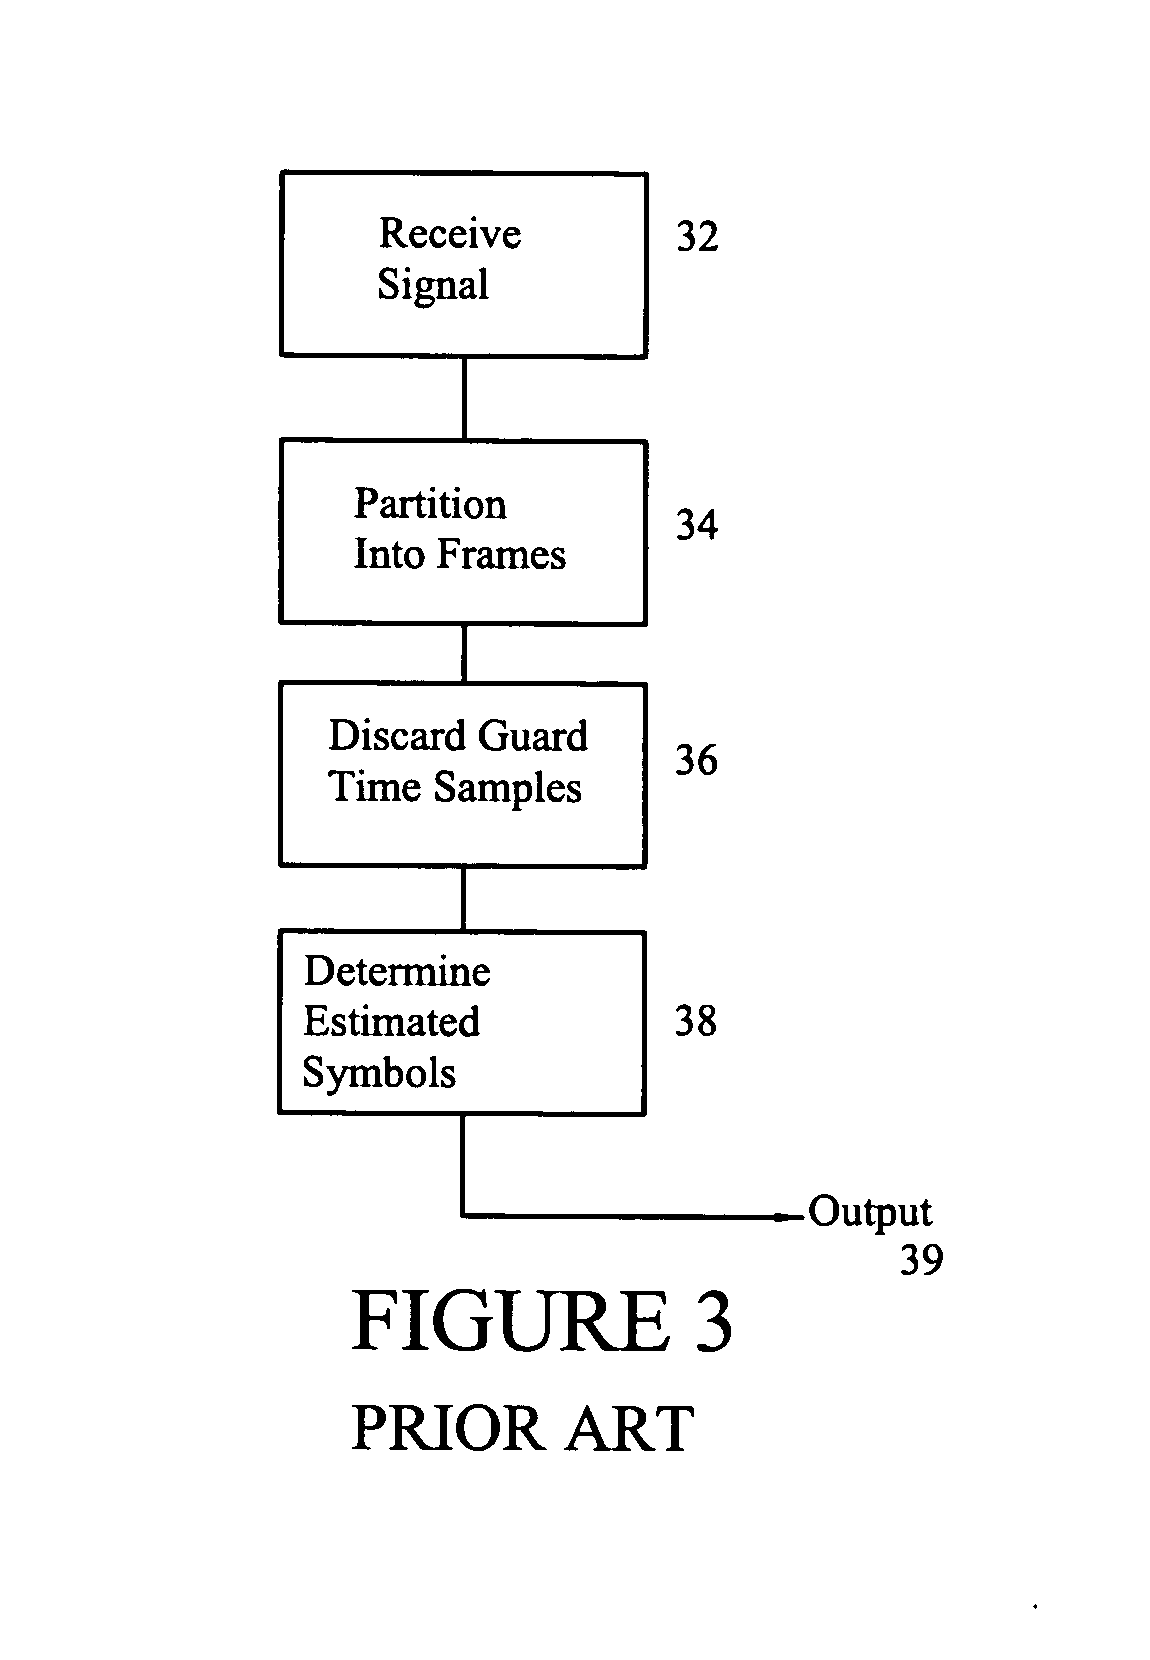 System and method for an adaptive receiver for the reception of signals subject to multipath interference